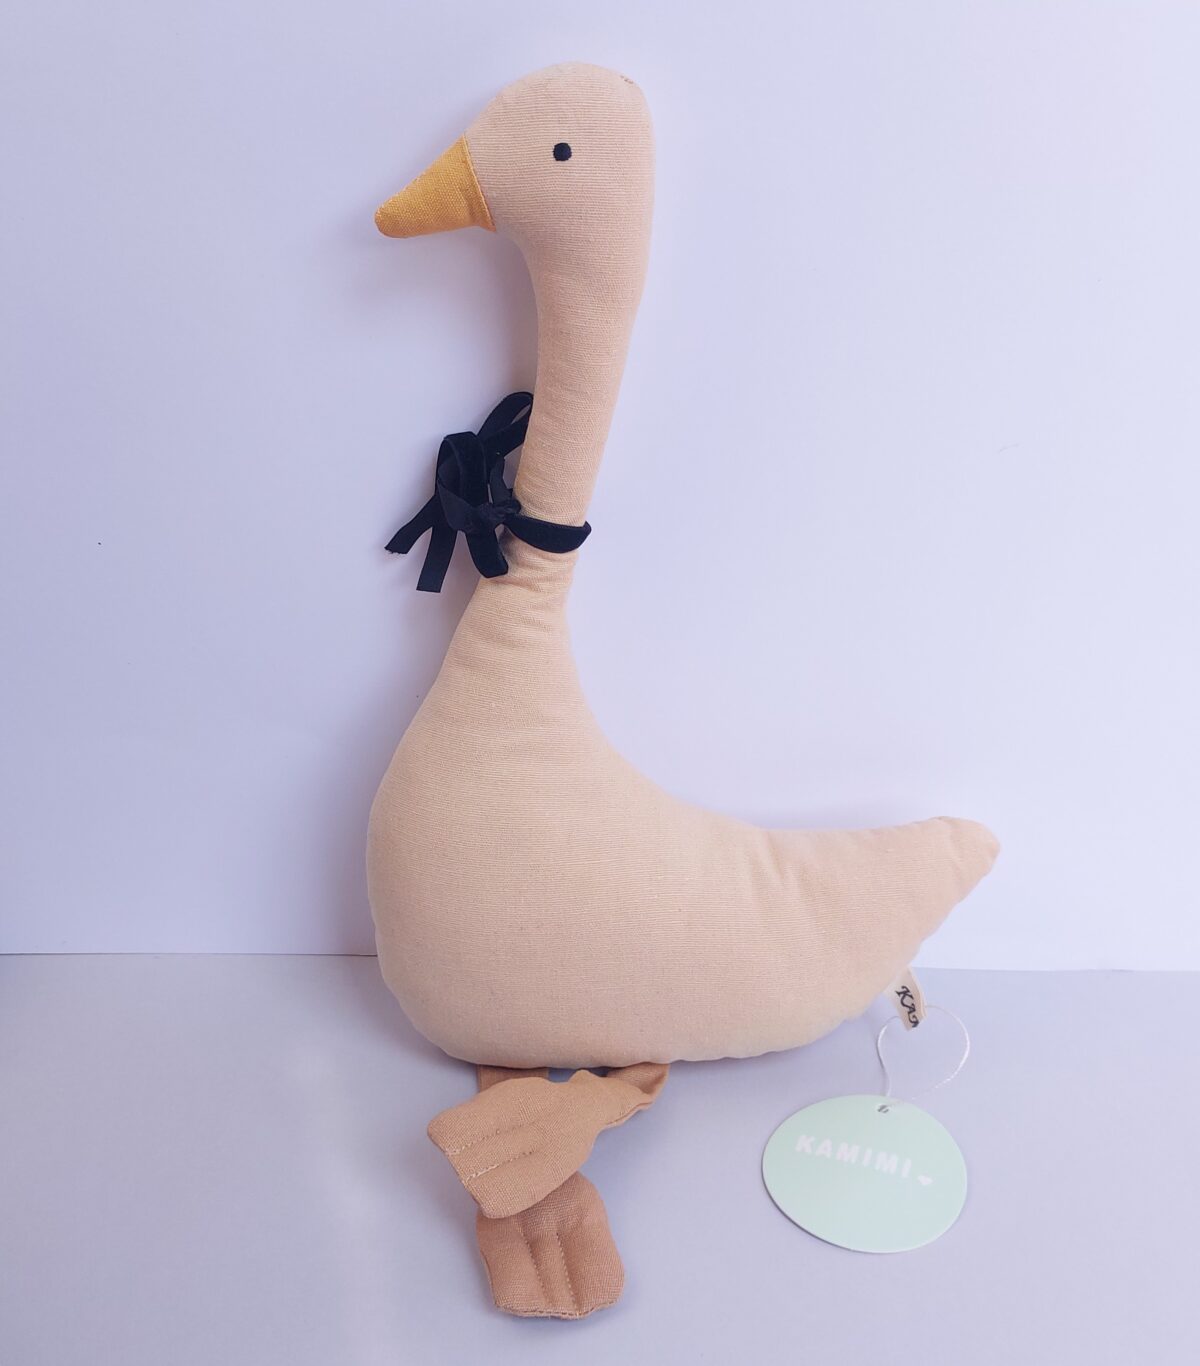 goose toy, nordic baby toys, present for a baby shower, cuddly toy, stuffed animal toy, nordic toys